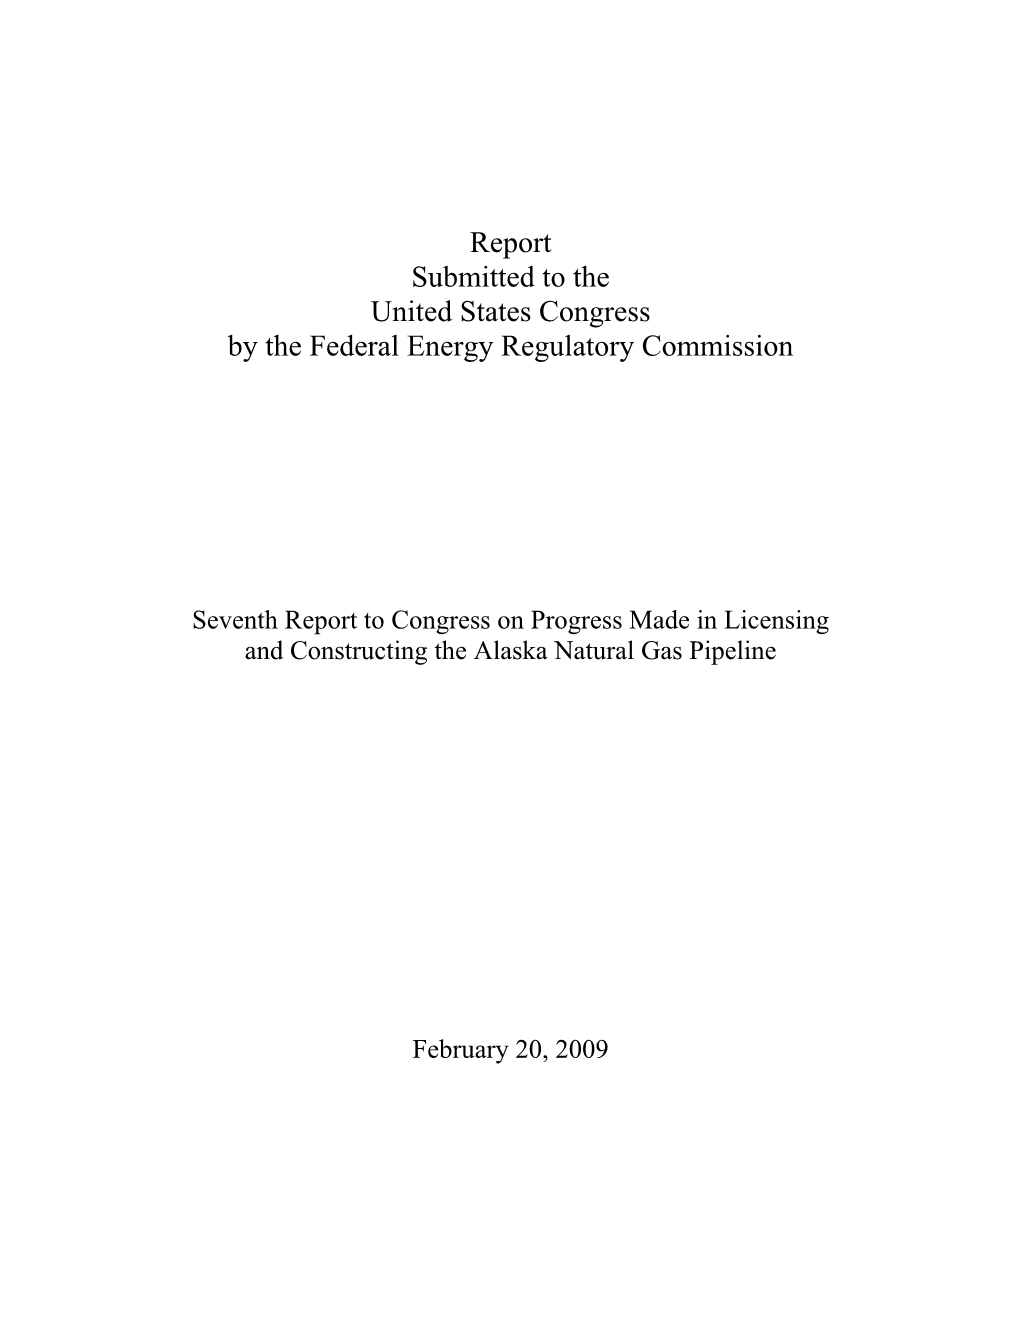 Seventh Report to Congress on the Alaska Pipeline